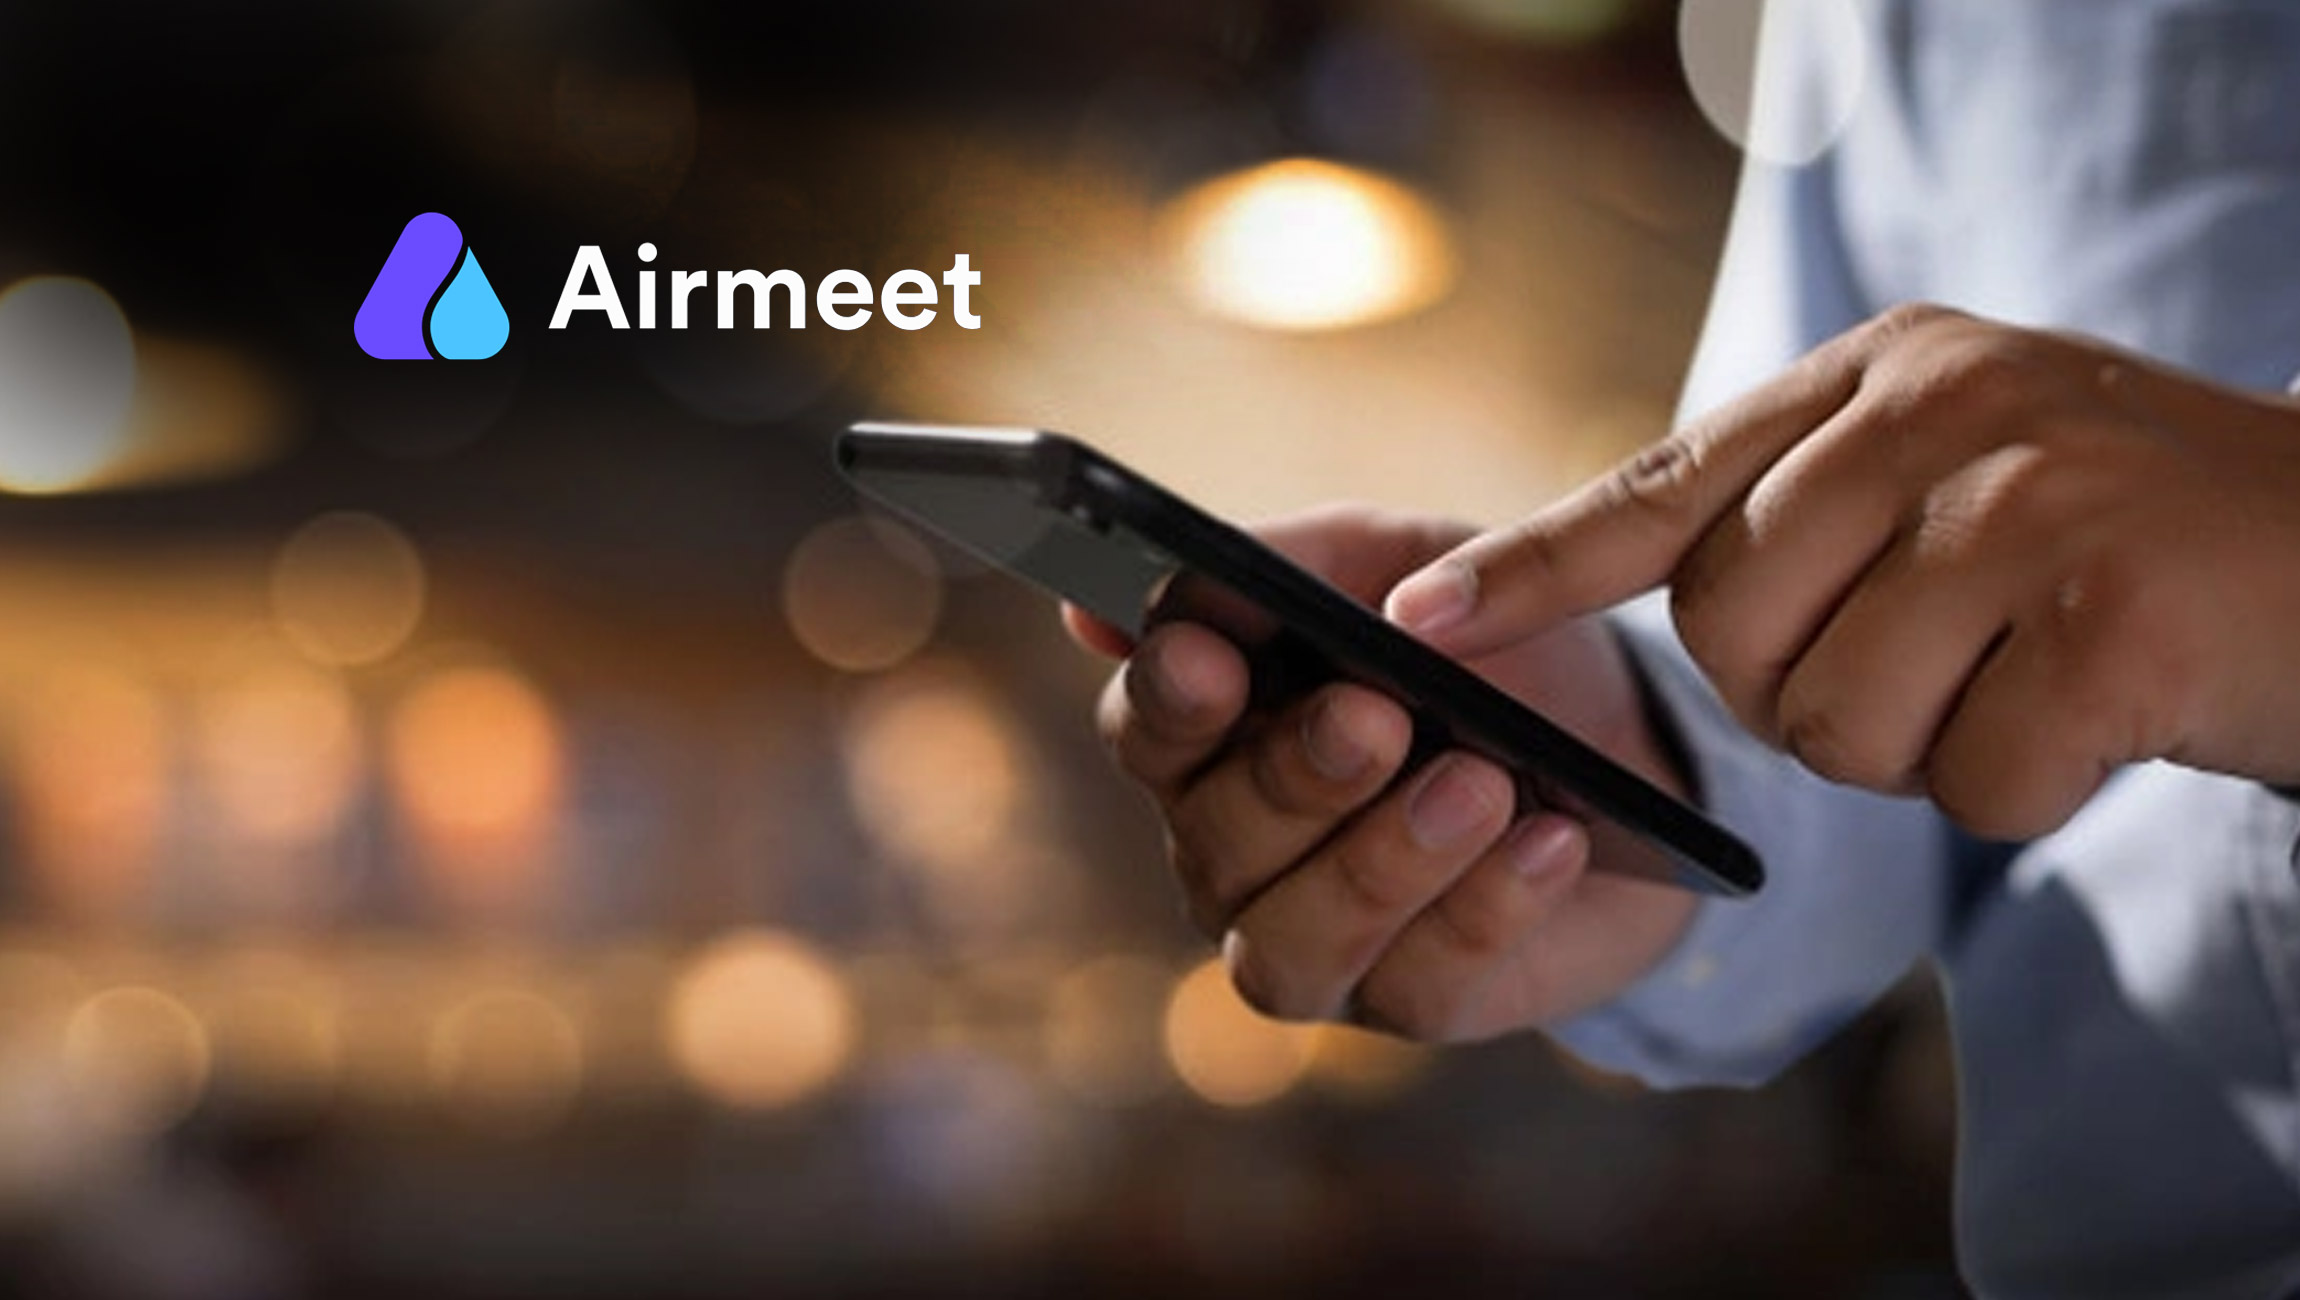 Airmeet innovates in the world of hybrid events with the launch of its mobile app